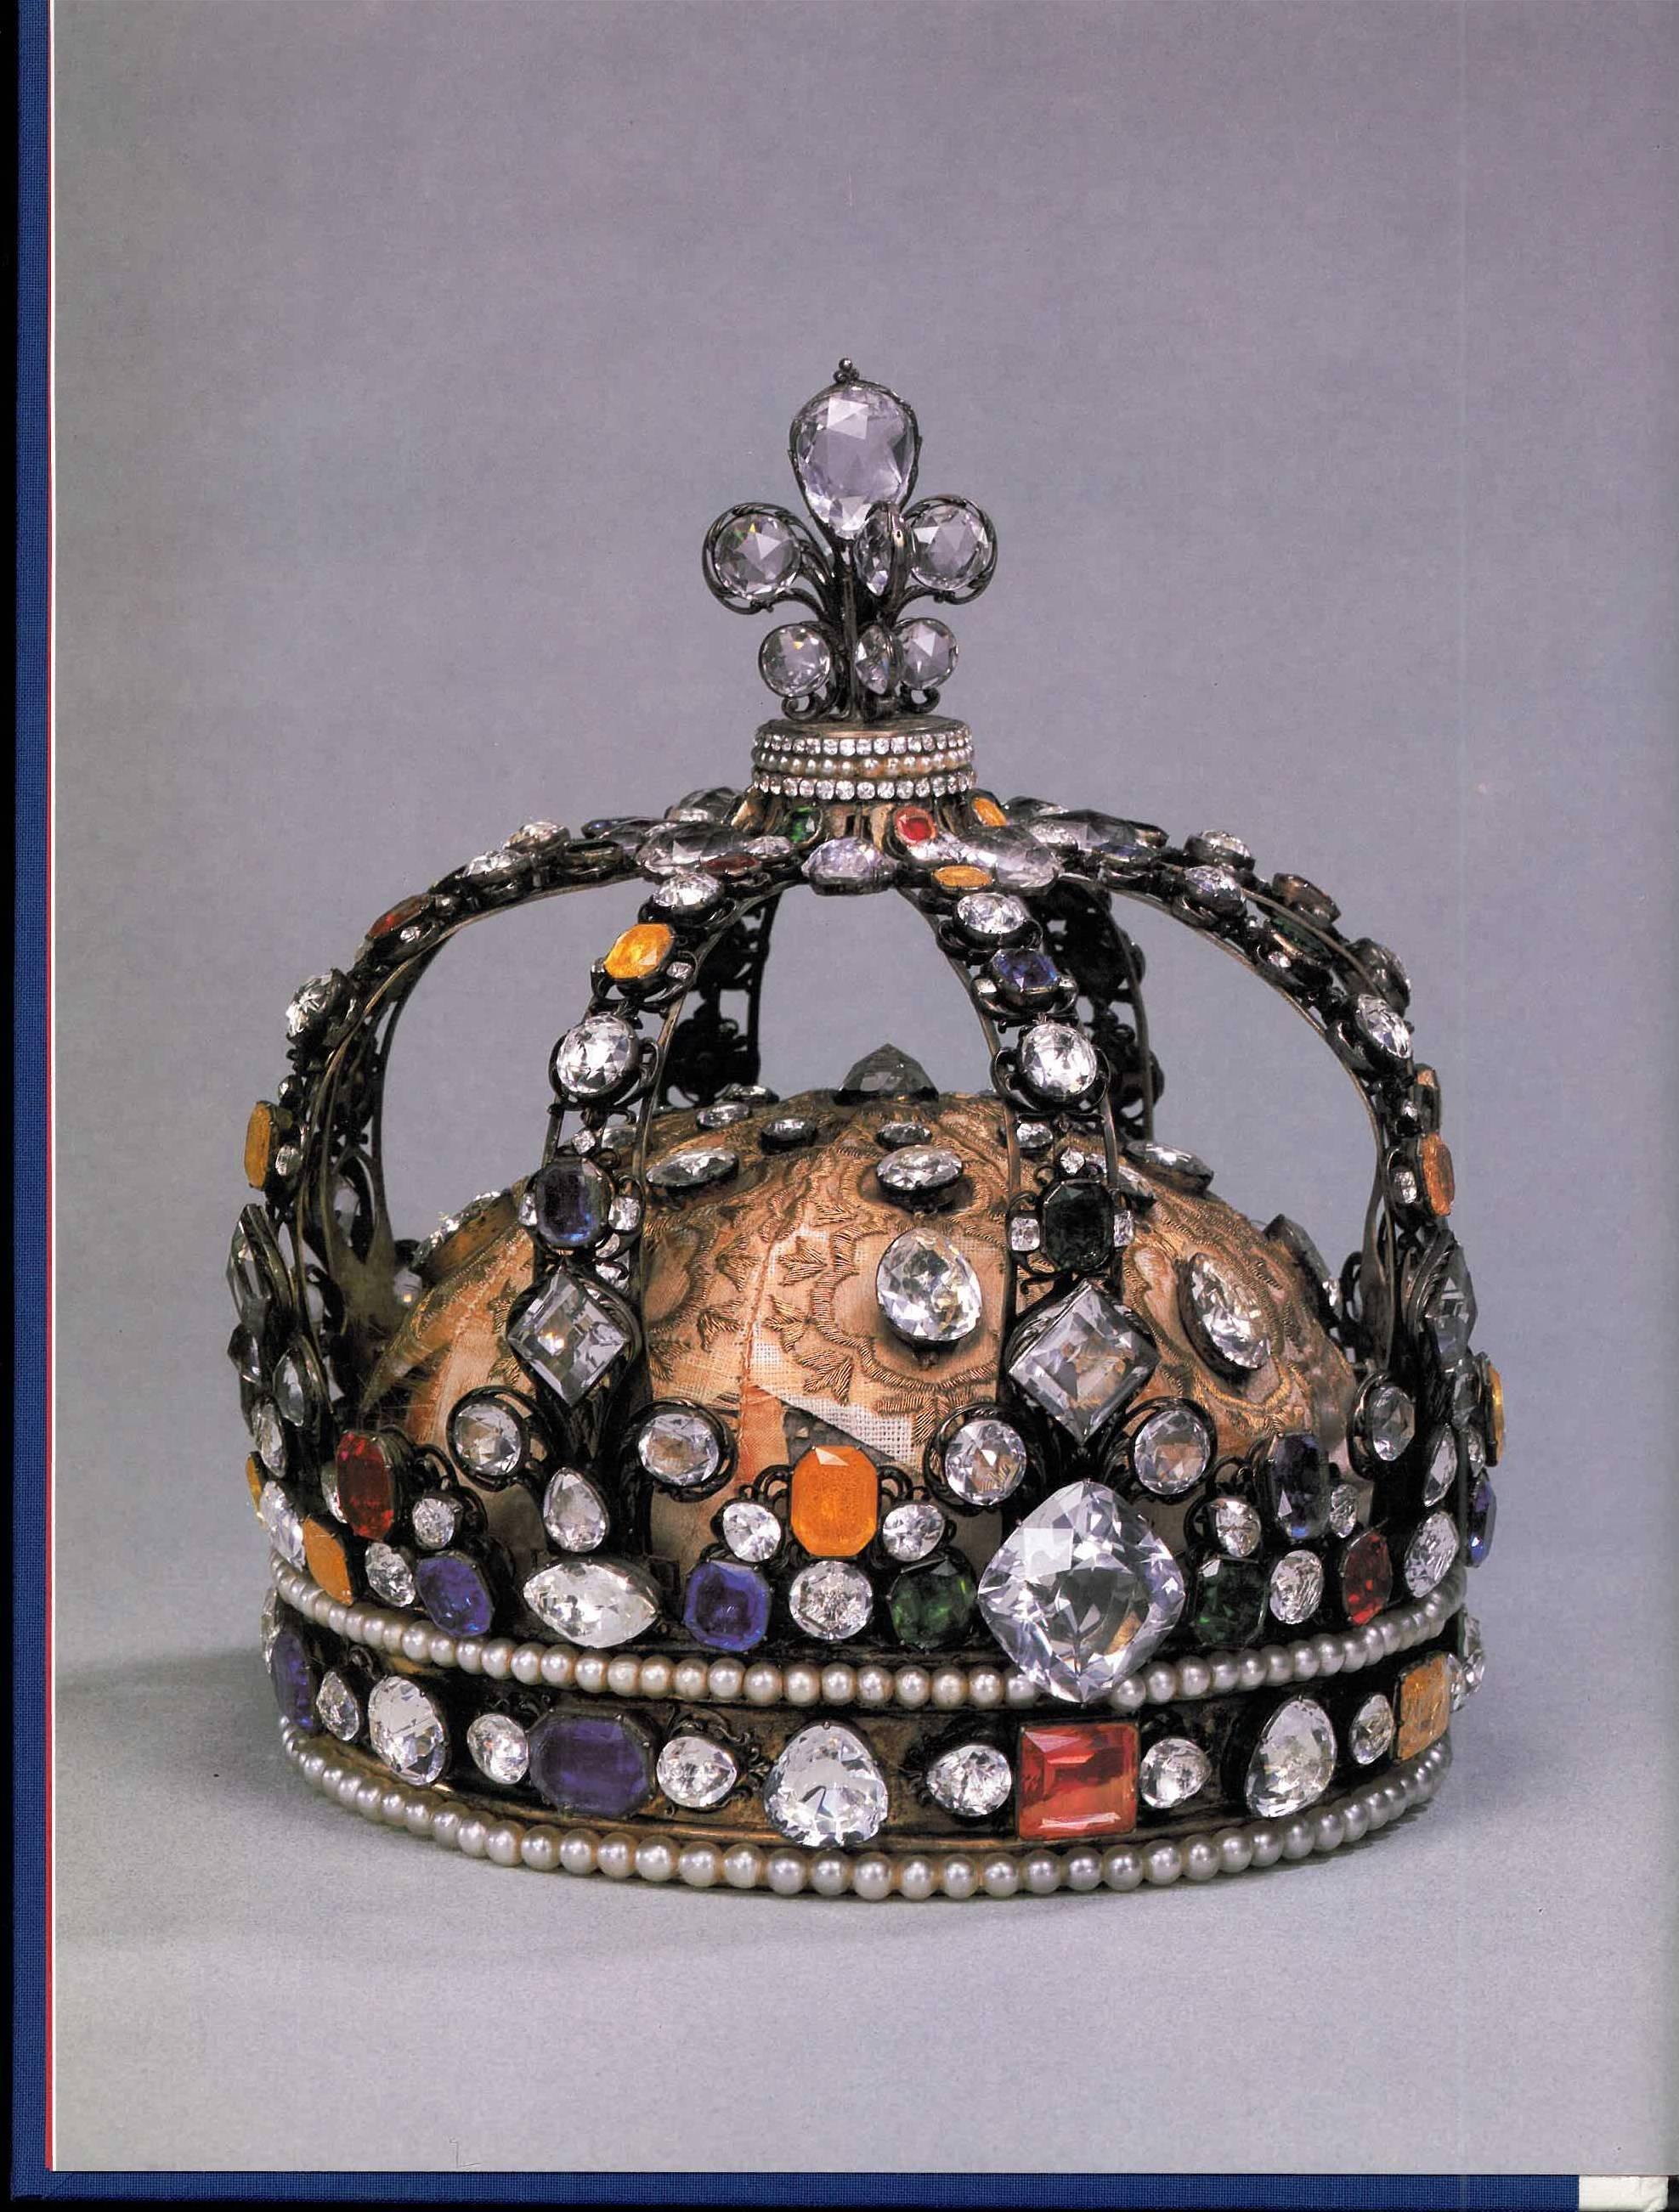 This is a beautiful hard back book which was published in 1988 - however it is lacking the dust jacket that it was published with. Ten centuries of history are covered following the marvellous jewels of the French Monarchy. There is a distinction in